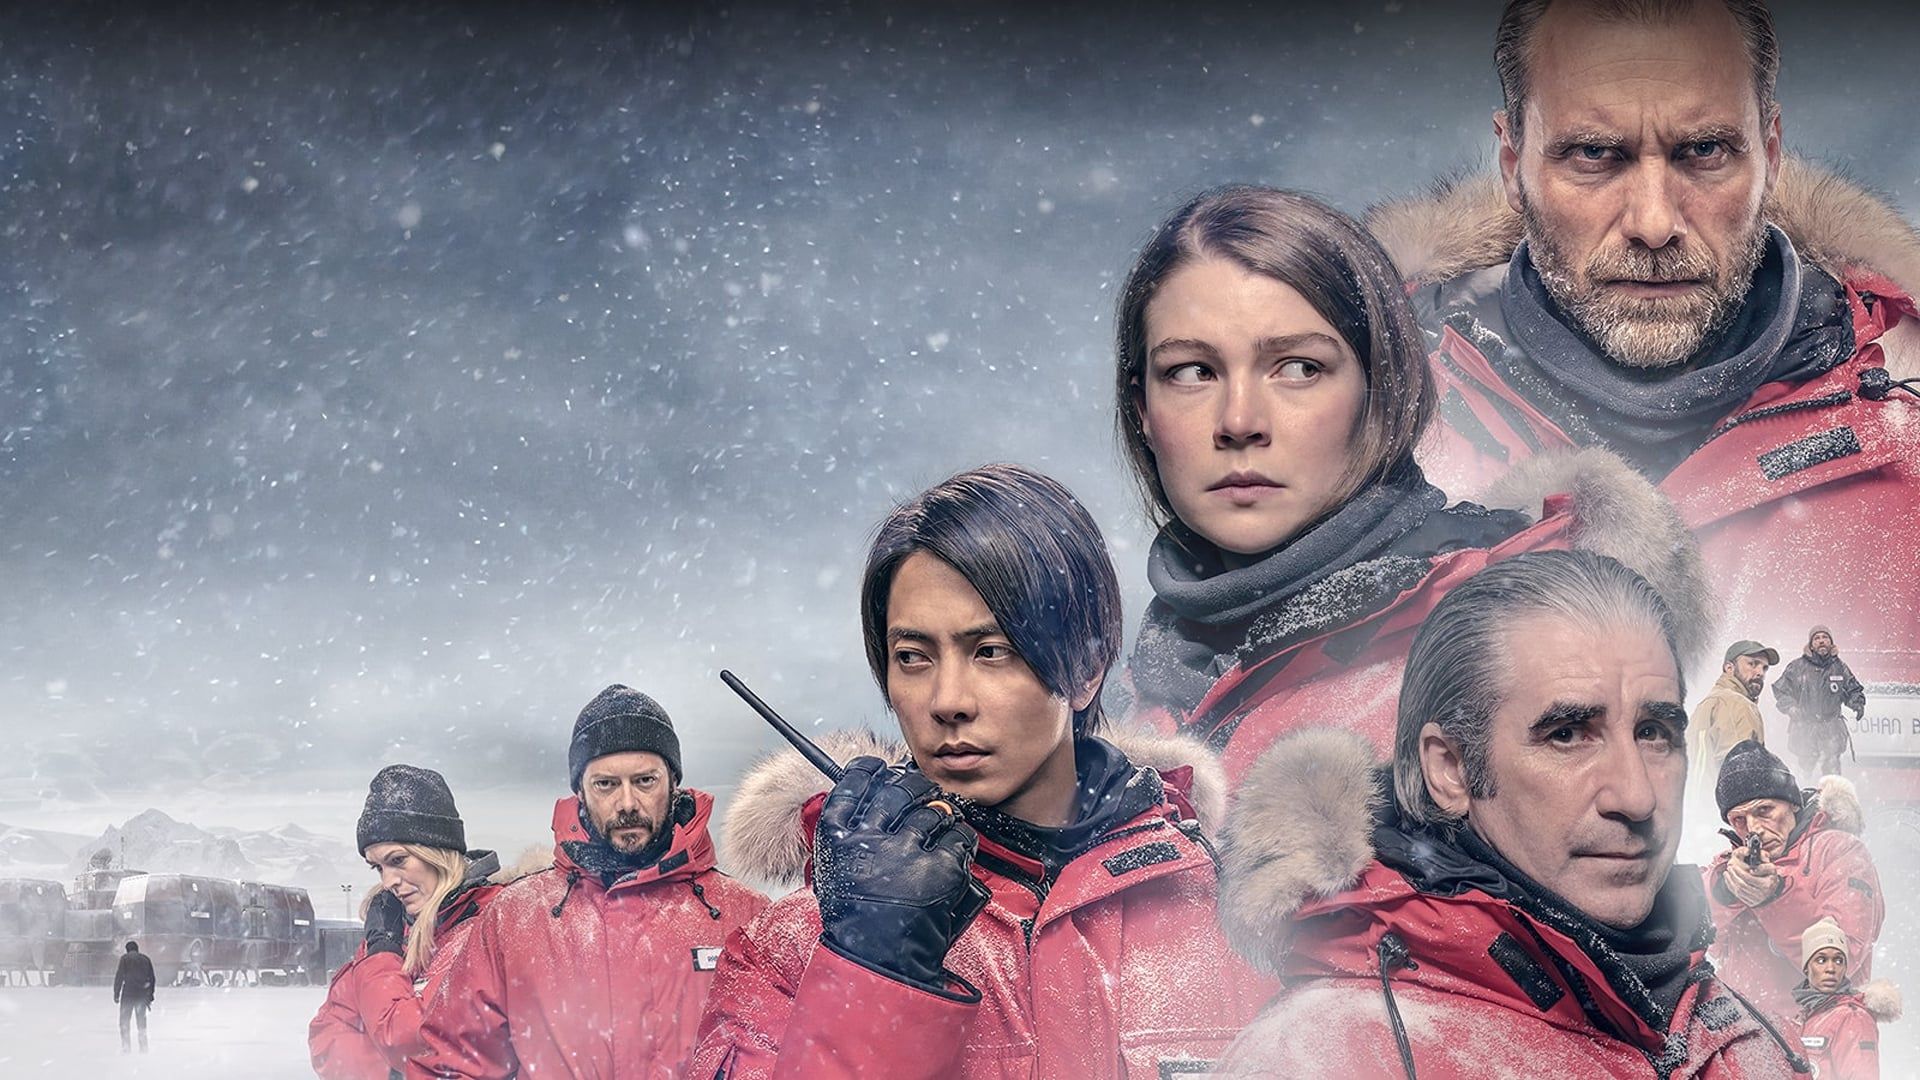 A team of scientists continues their research during winter in the South Pole. Come spring, the commander returns to find his team in grave danger.